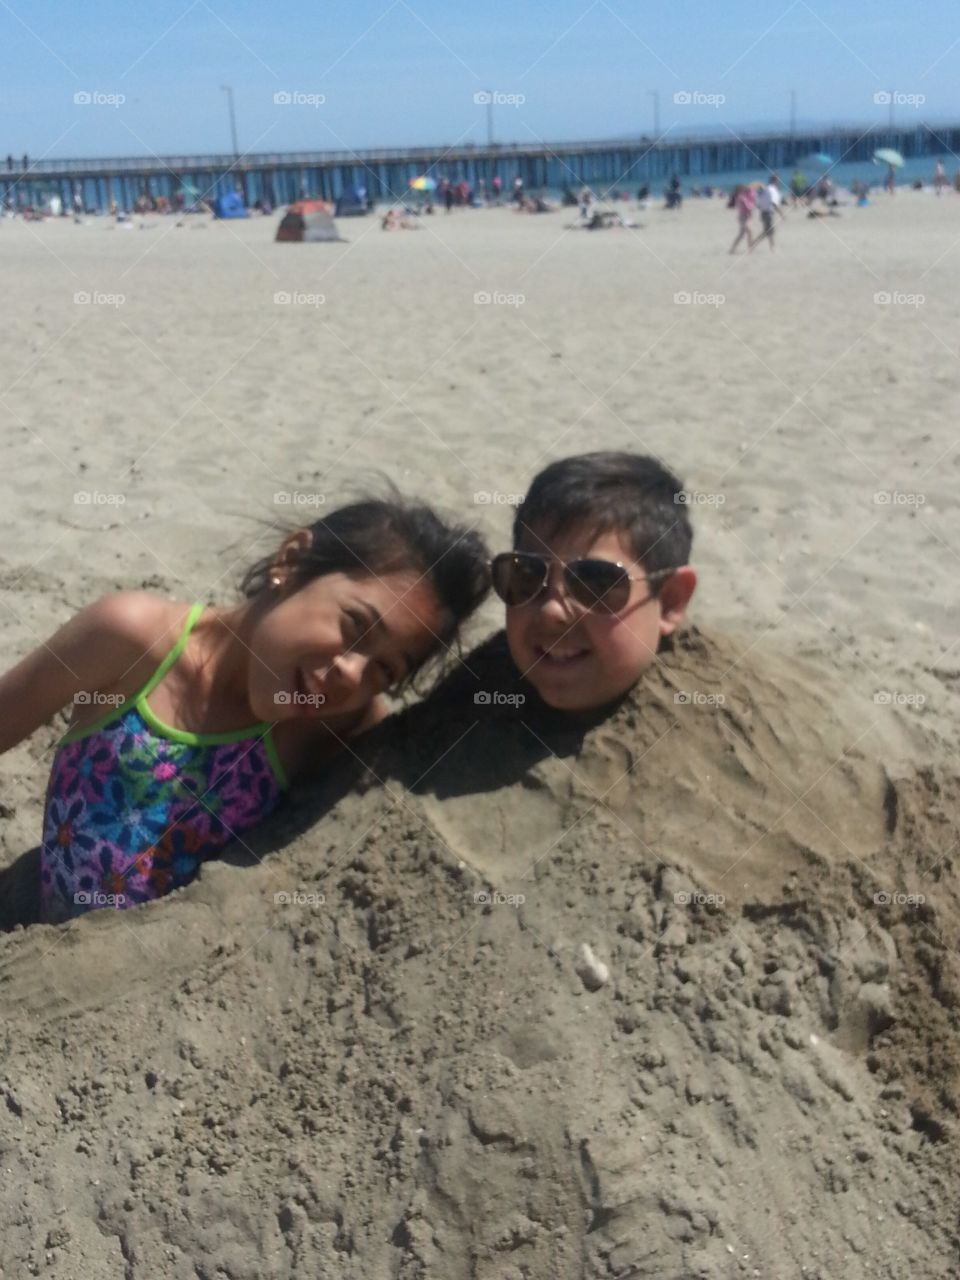 Just a couple of kids playing in the sand on a beautiful summer day!